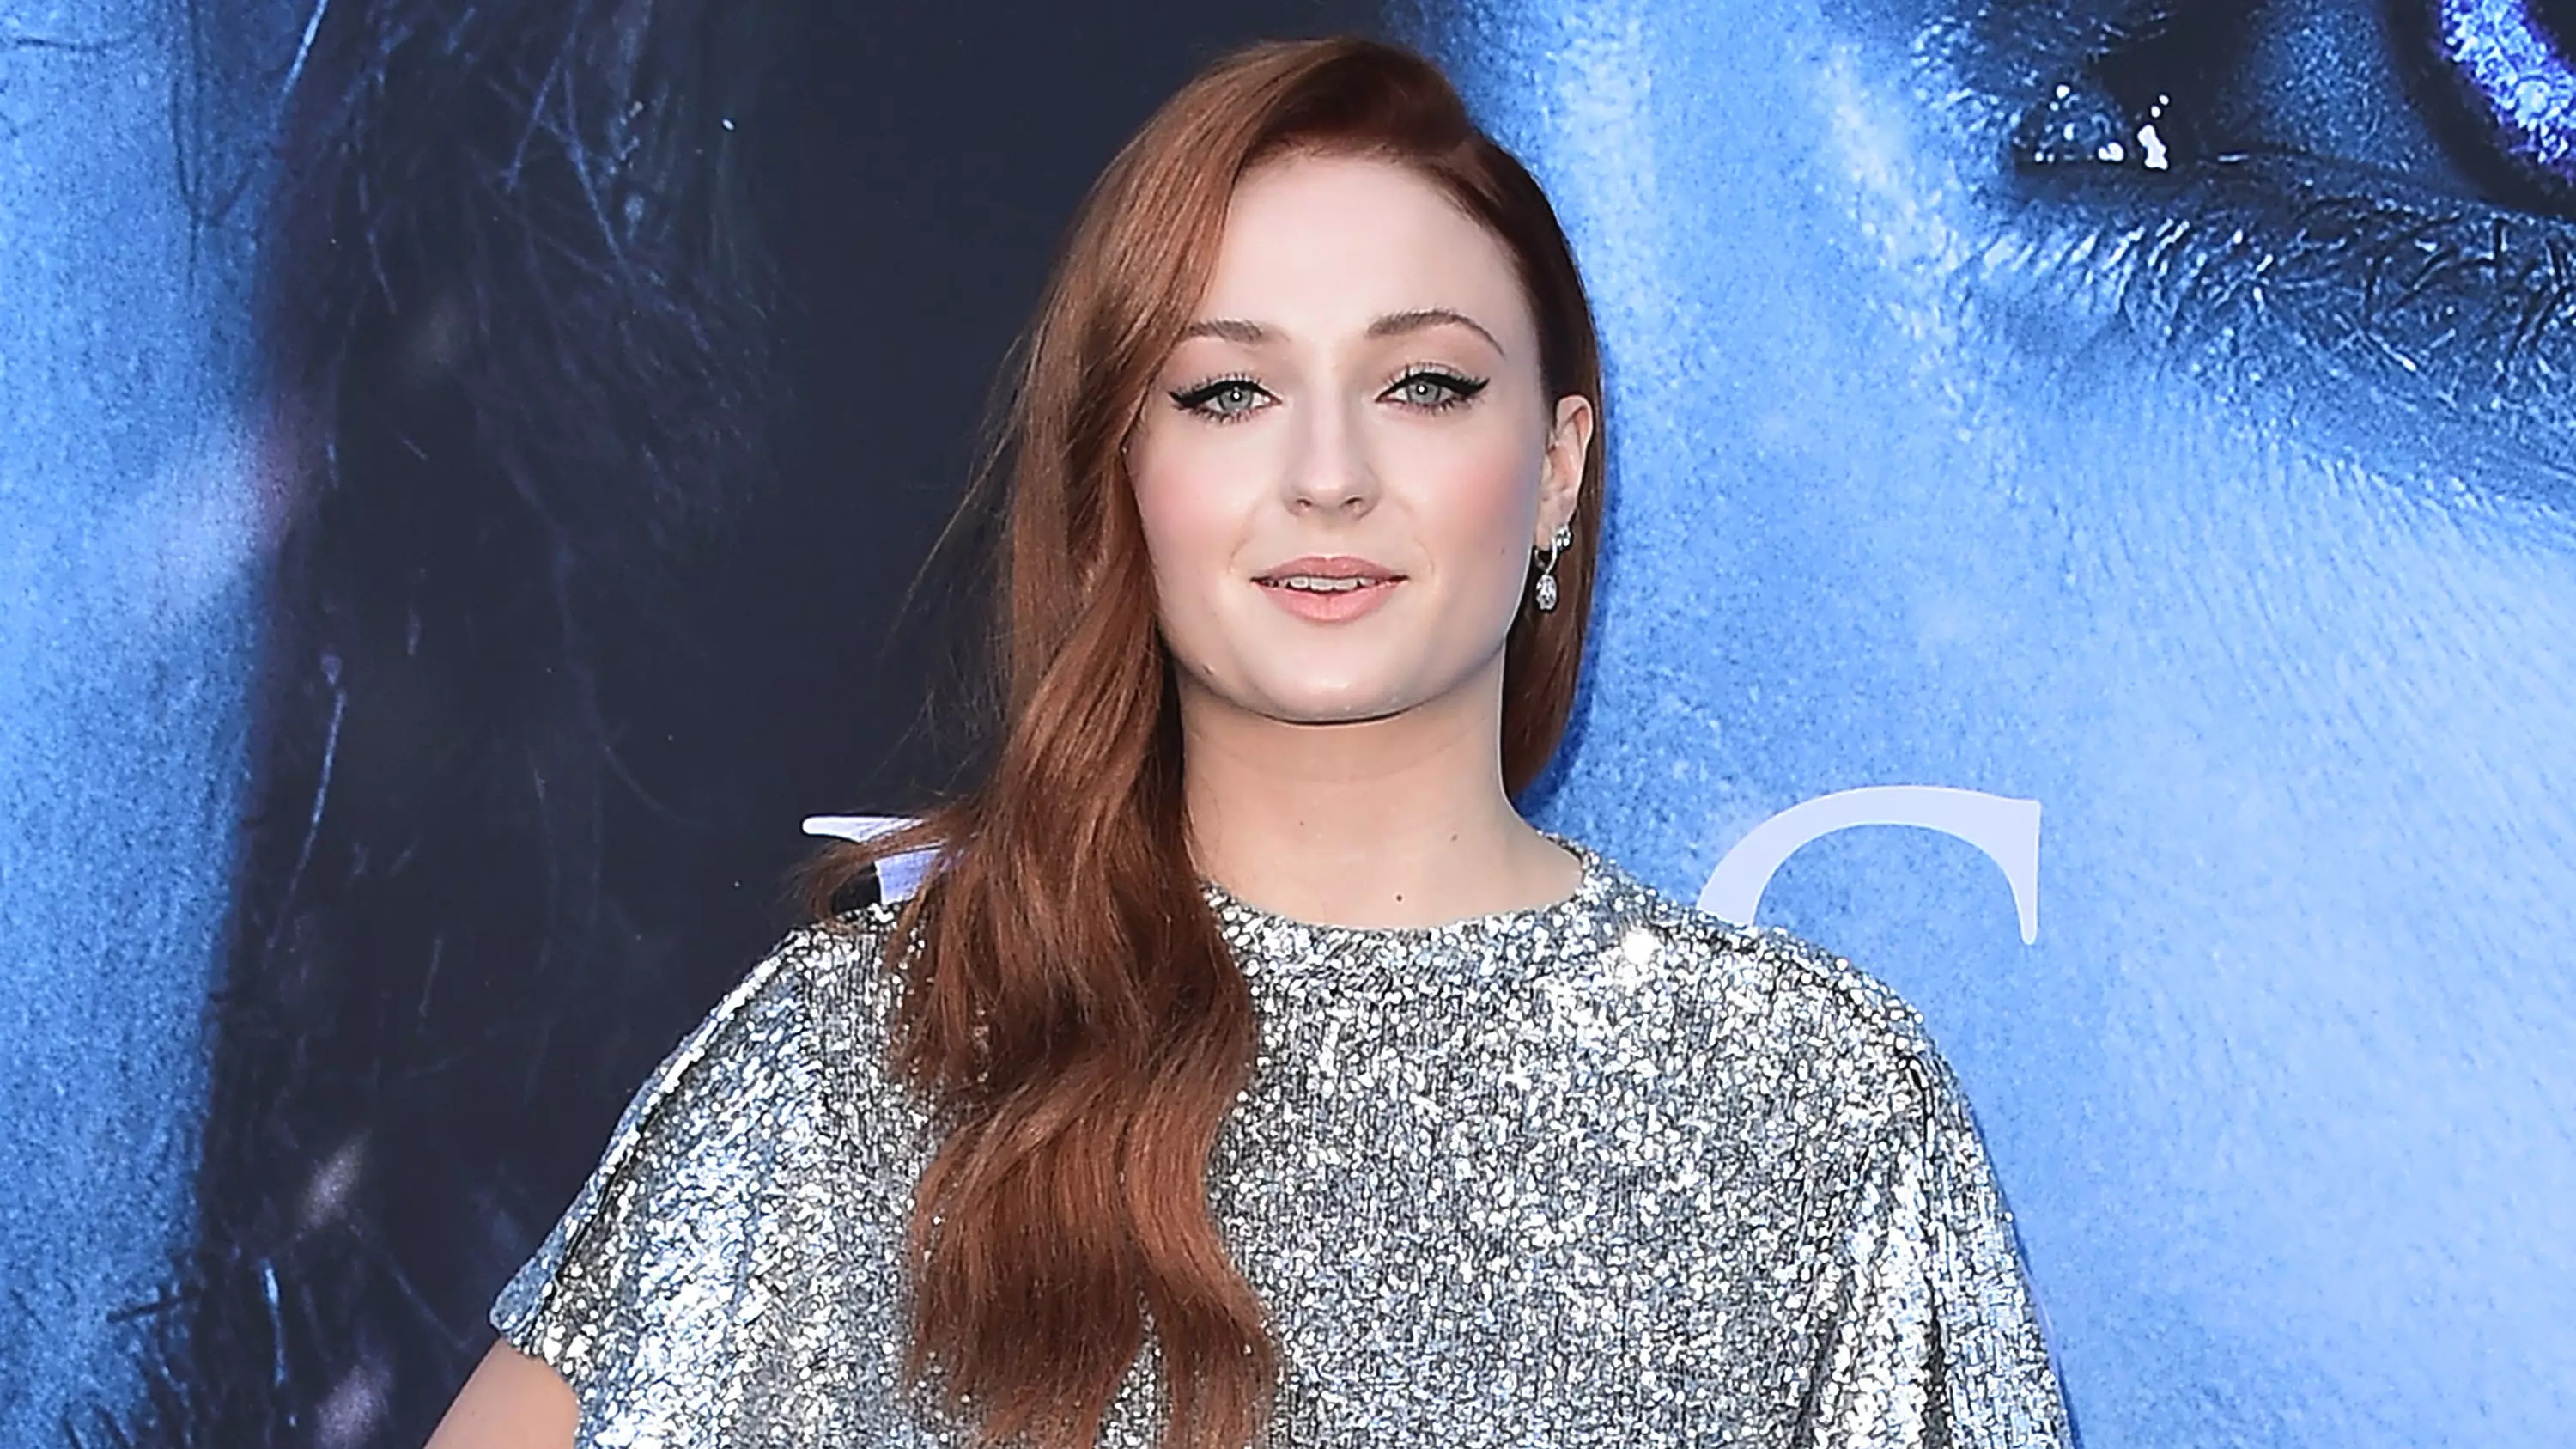 Sophie Turner Just Annihilated Piers Morgan For His Tweets About Mental Health